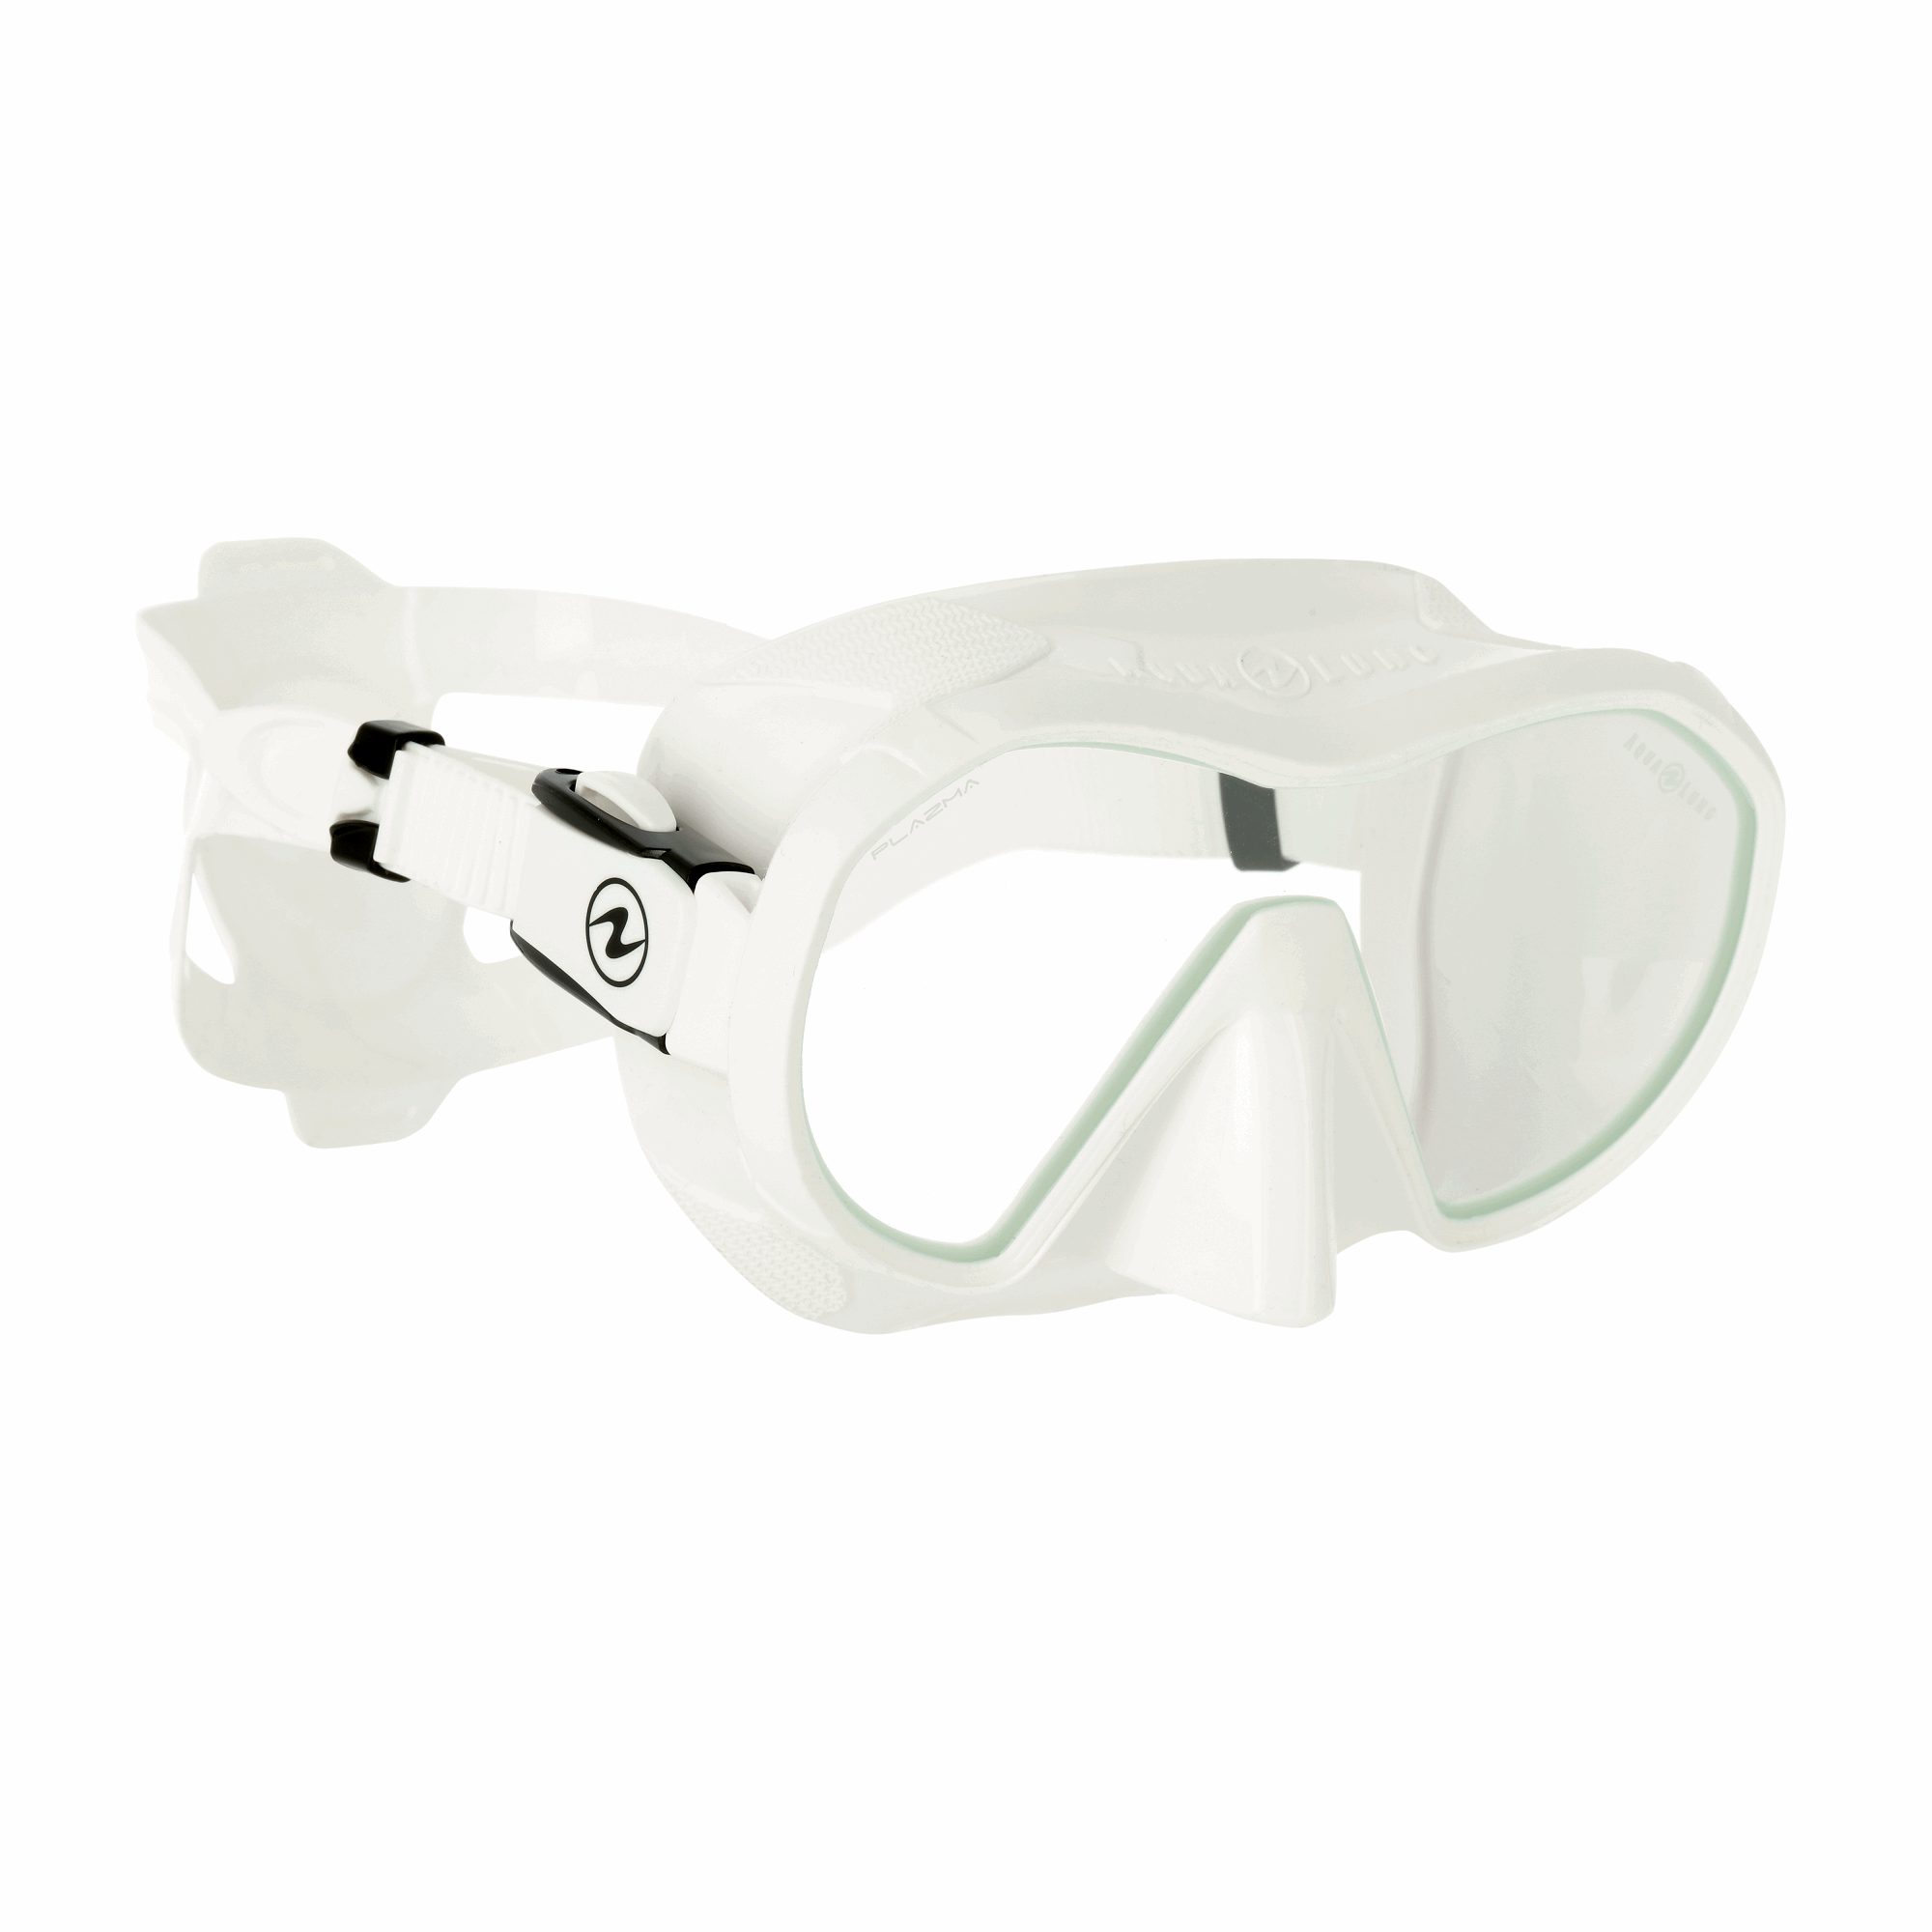 Aqualung Aqualung Plazma Mask White/White - Oyster Diving